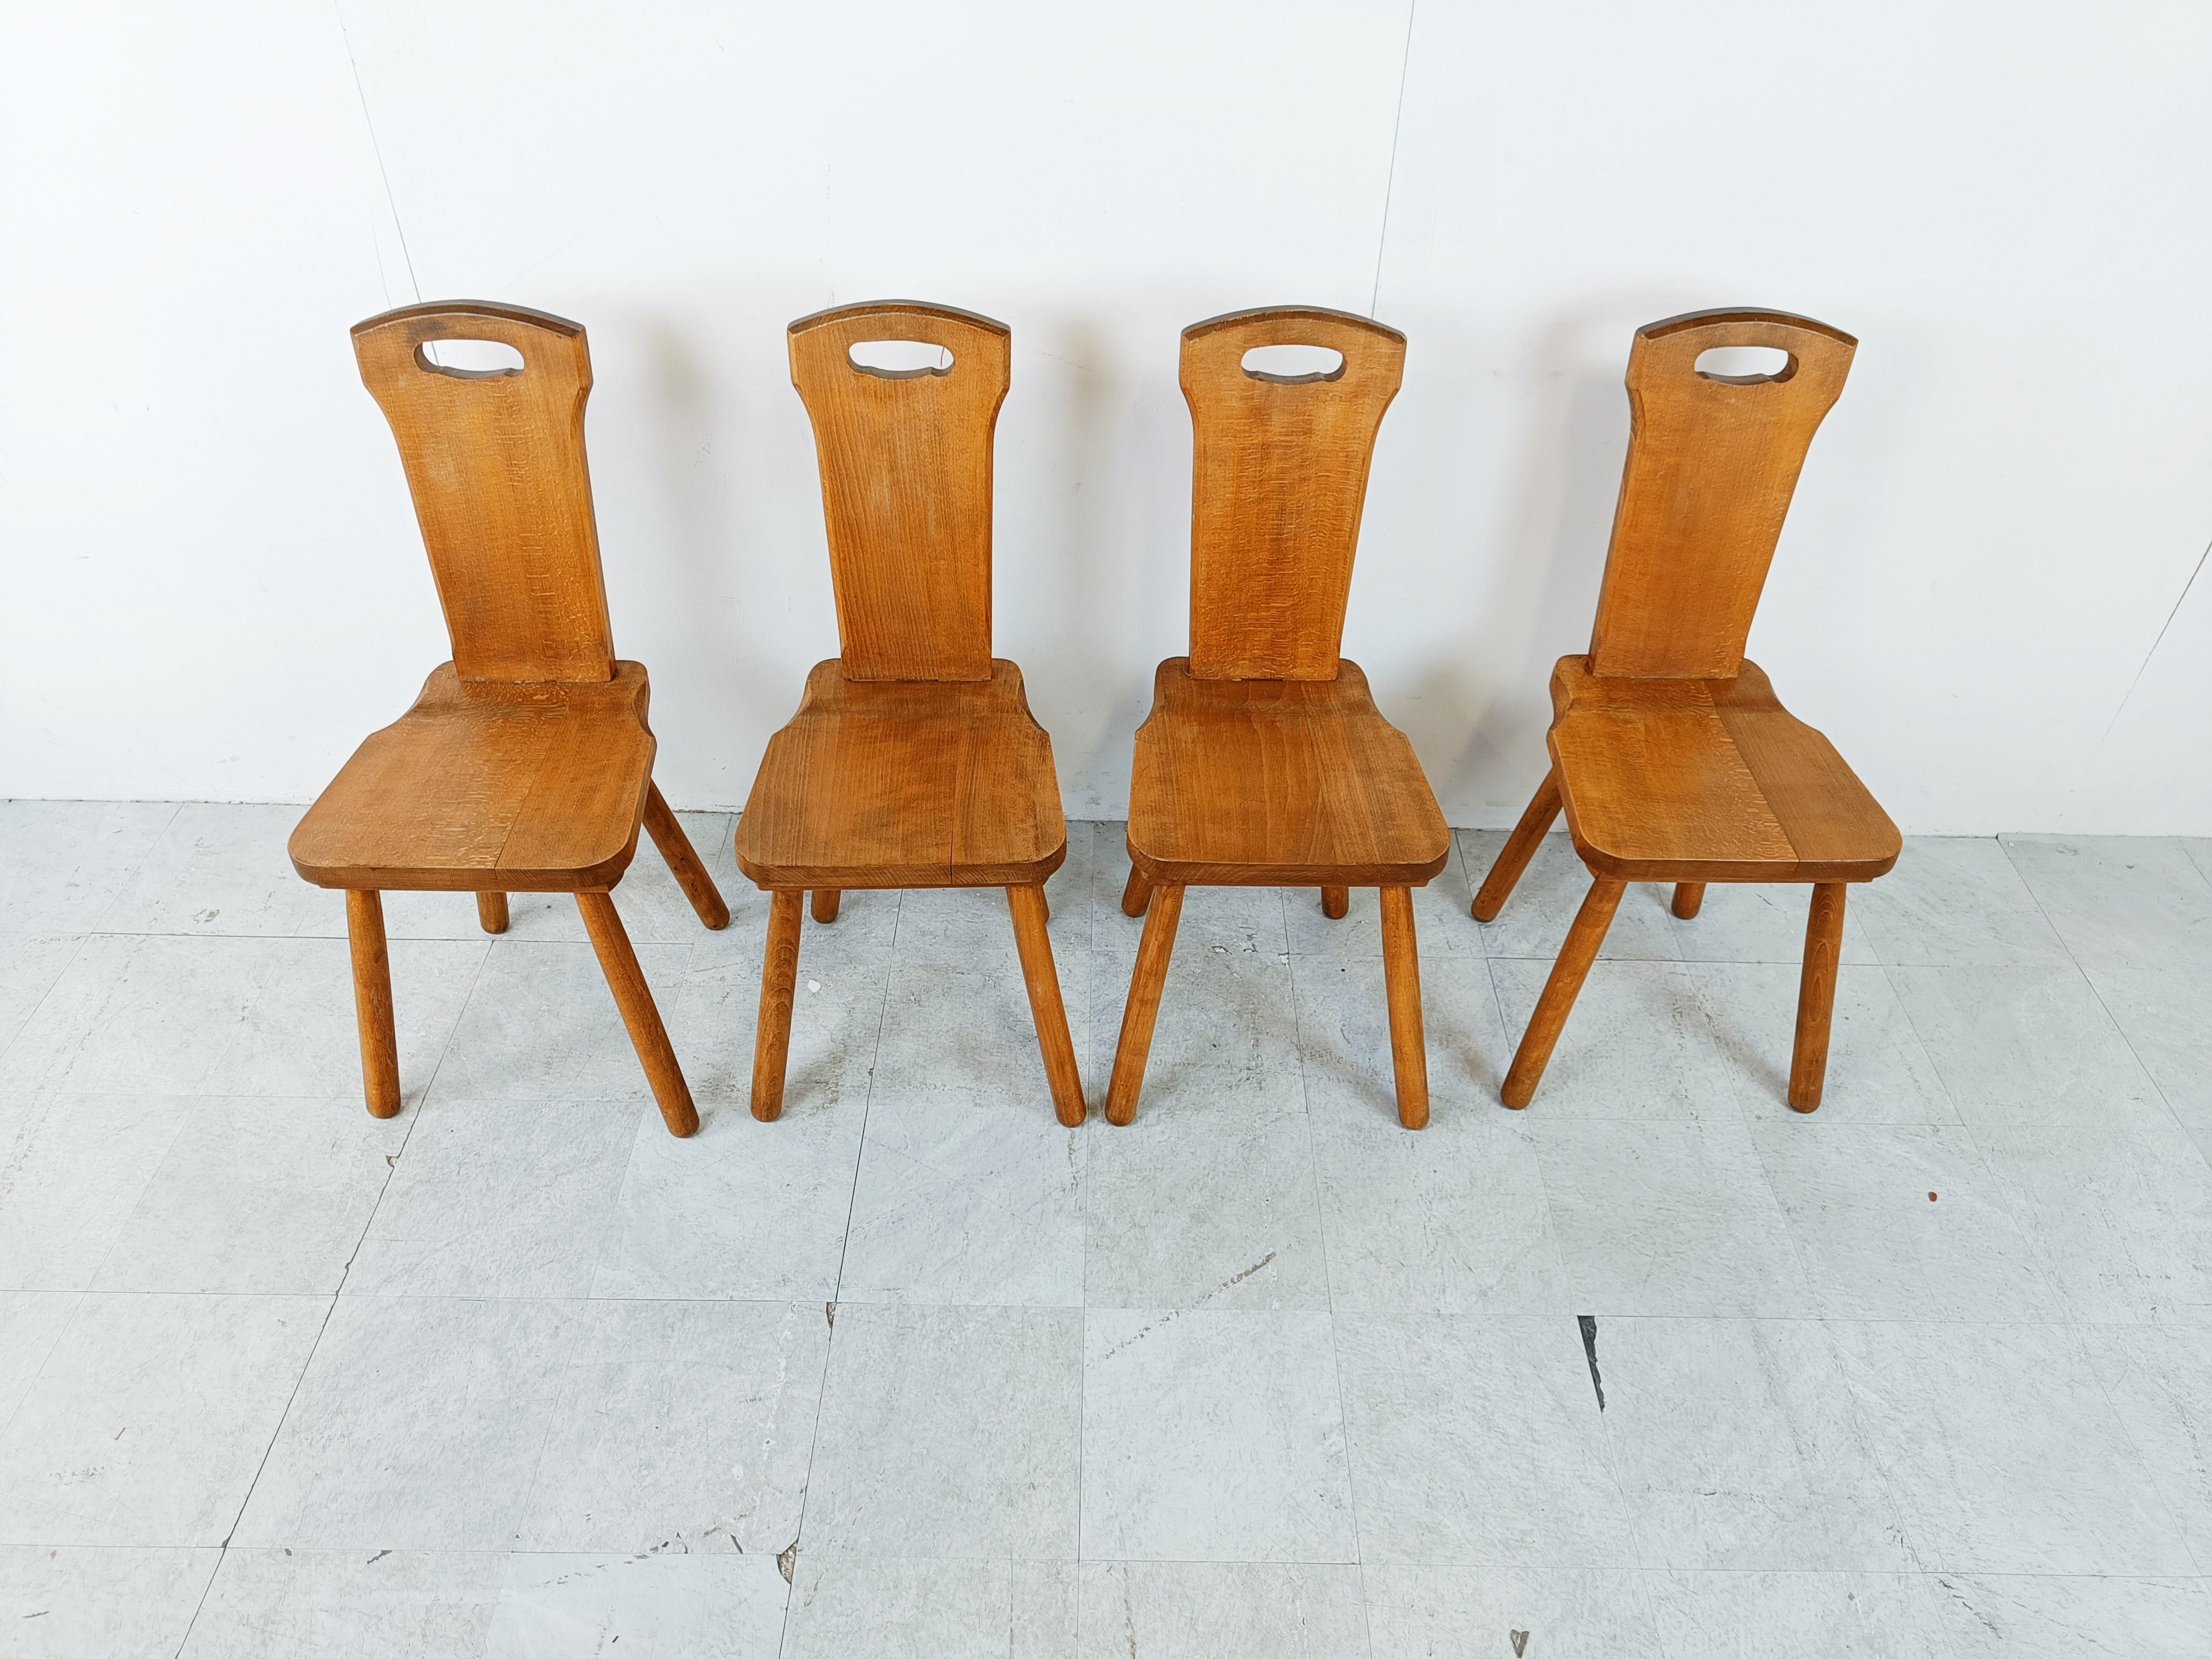 Vintage solid oak swedish dining chairs

These rustic chairs where handcrafted.

Good condition with normal age related wear

1960s - Sweden

Dimensions:
Height: 96cm/37.79